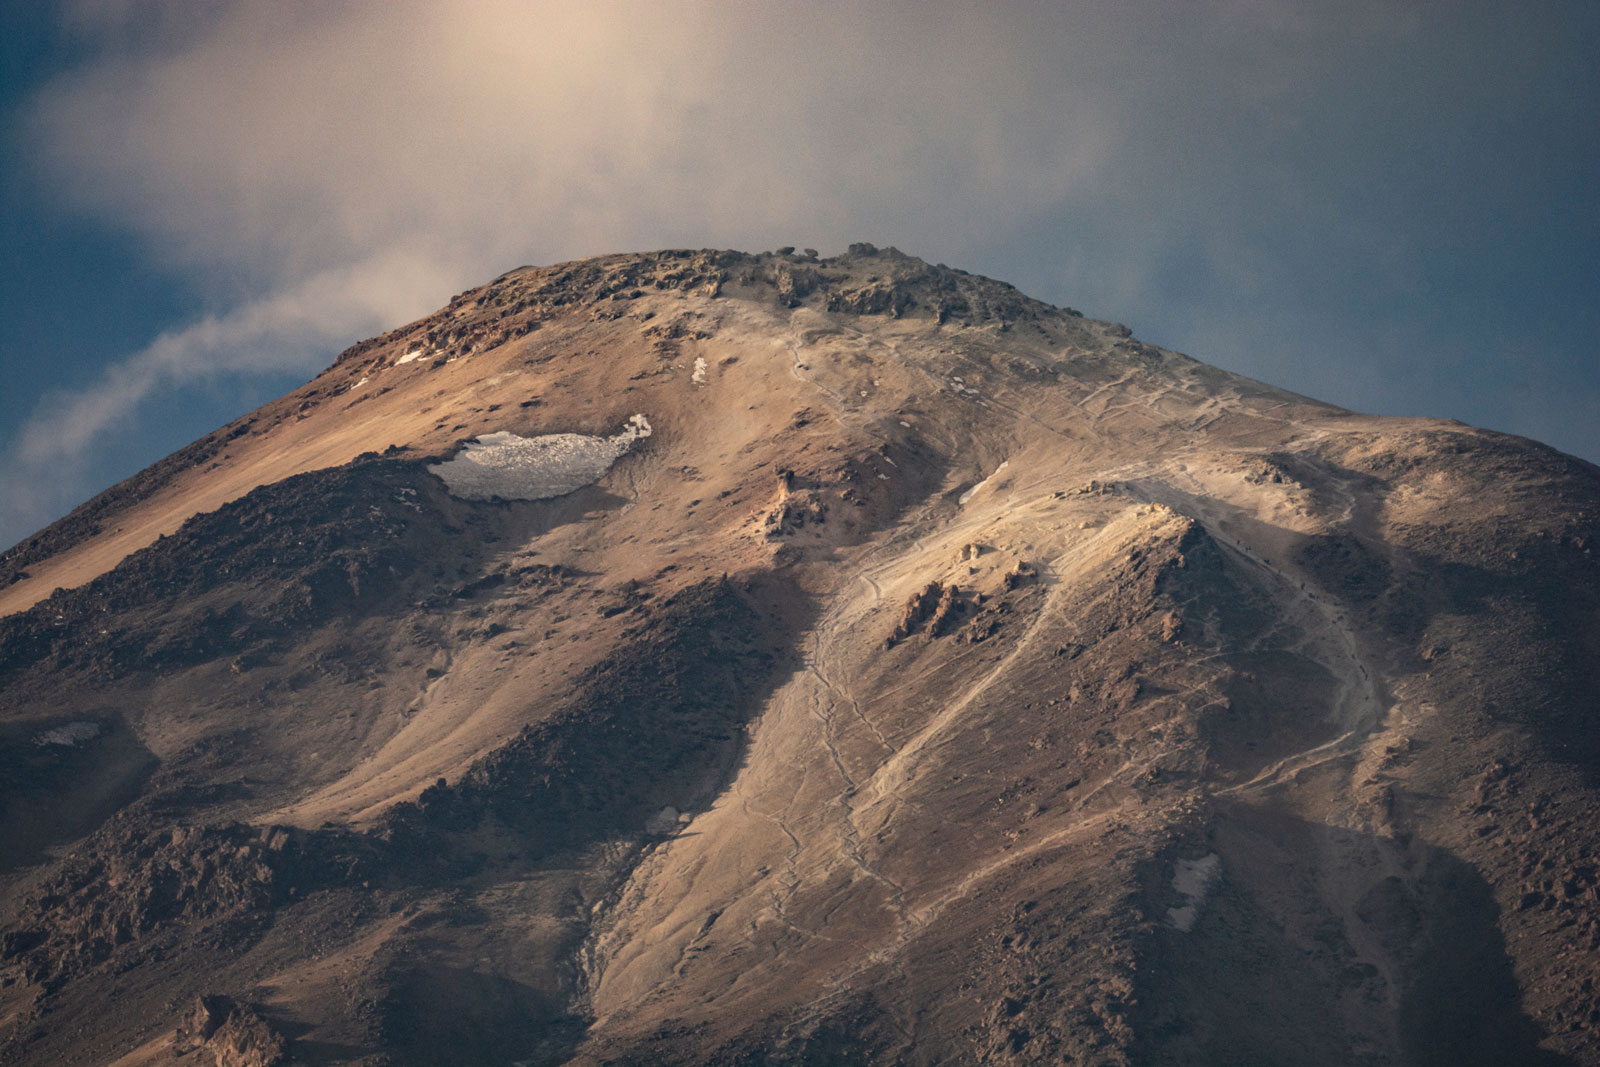 Damavand Mountain is the highest peak in Iran and the highest volcano in the Middle East. The amount of details render by Tokina SZ 500mm reflect lens from the peak is surprising! If you see carefully on the right of image, even individual mountaineers is resolved at the end of main south route to the peak (elevation 5600m)!